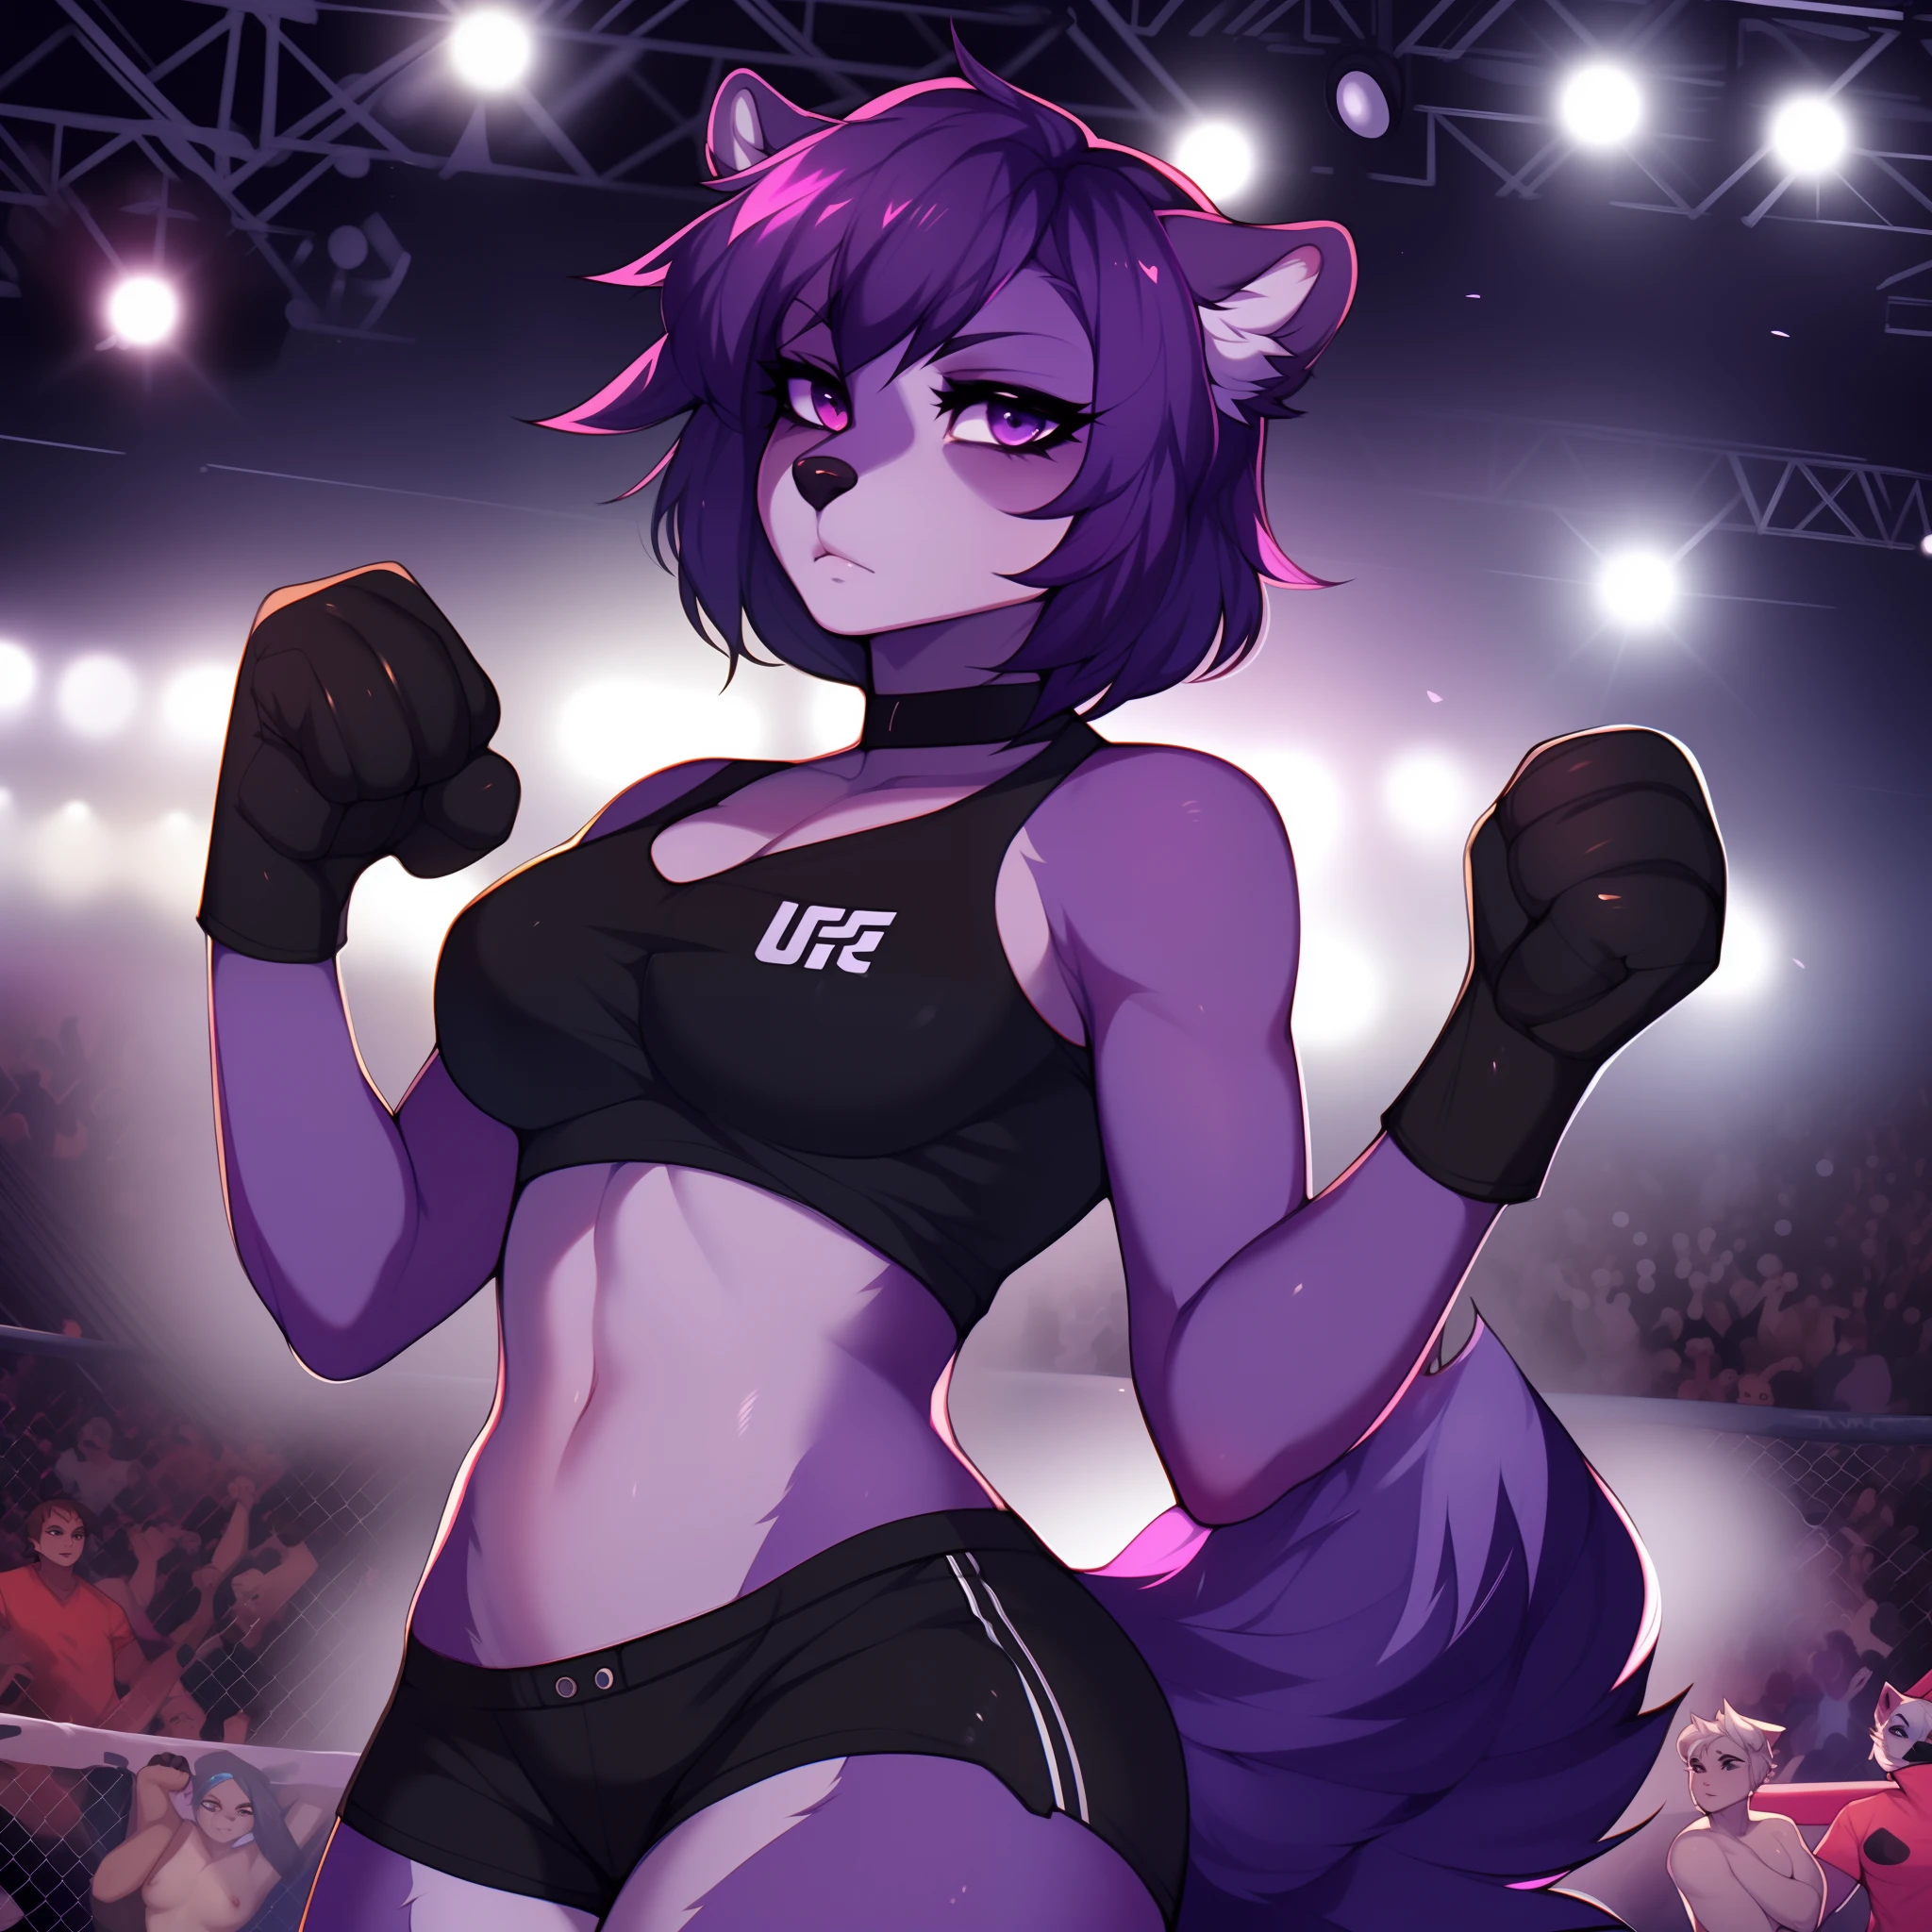 (By hyattlen, by fumiko, by claweddrip:1.2), solo, one girl, a purple anthro furry skunk girl, female, (purple fluffy body, light purple chest), black nose, (cute snout:1.1), purple skunk tail, dark purple hair, highly detailed, wearing black tank top, black ufc gloves, exposed fingers, black shorts, 4 toes, in a ufc ring, huge crowd, audience, standing, ready to fight, fists up, serious face, wearing ufc gloves,in a ufc arena,